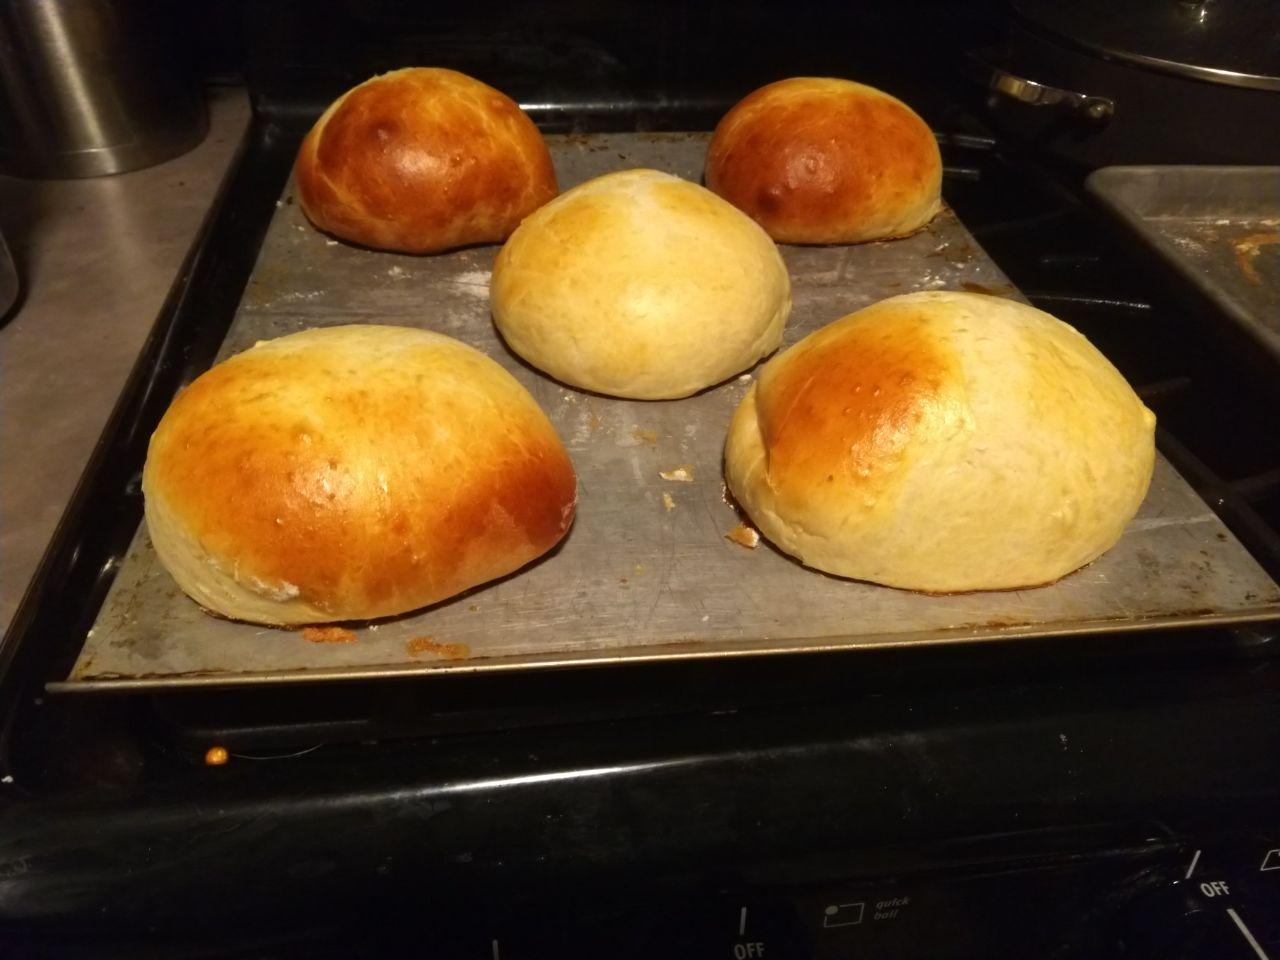 Cooked buns on a baking sheet.